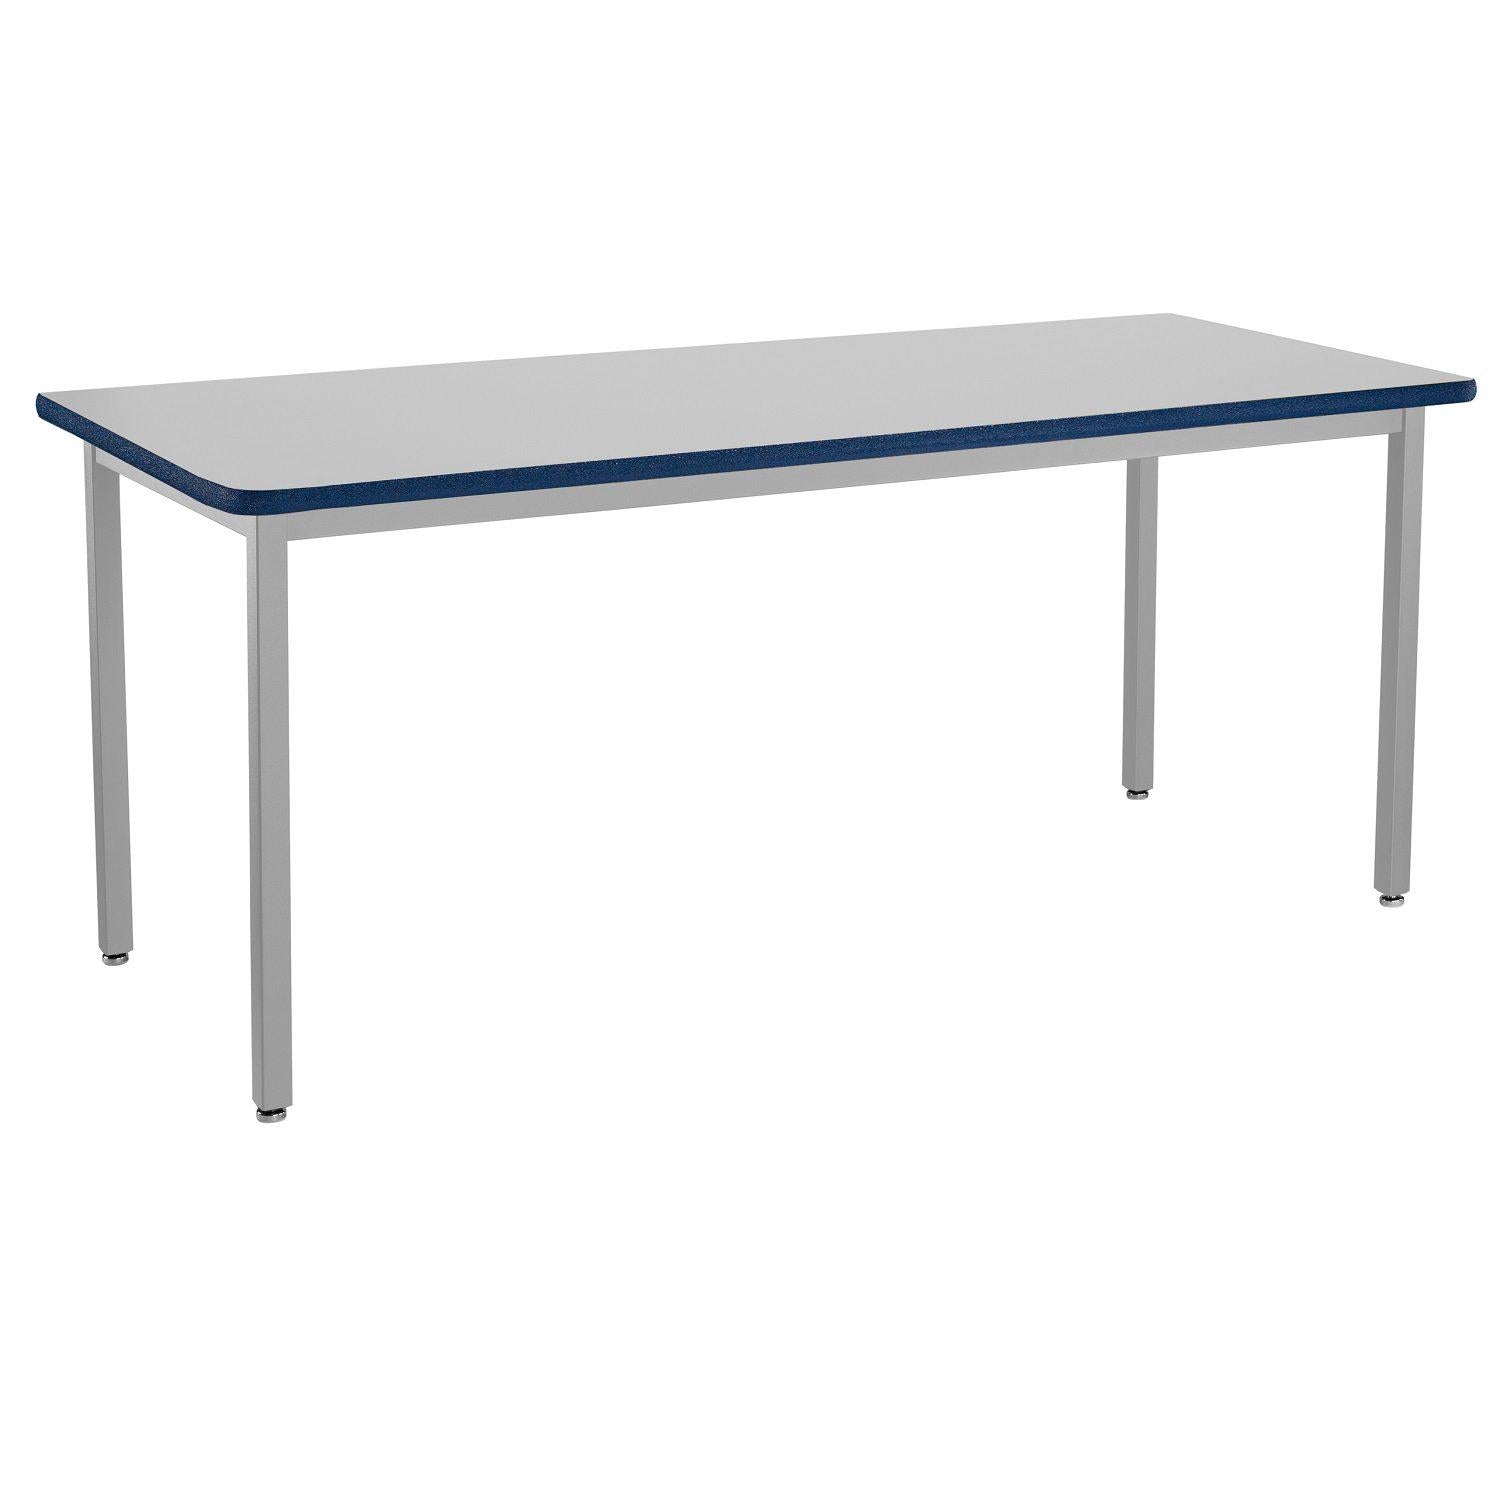 Heavy-Duty Fixed Height Utility Table, Soft Grey Frame, 30" x 72", Supreme High-Pressure Laminate Top with Black ProtectEdge